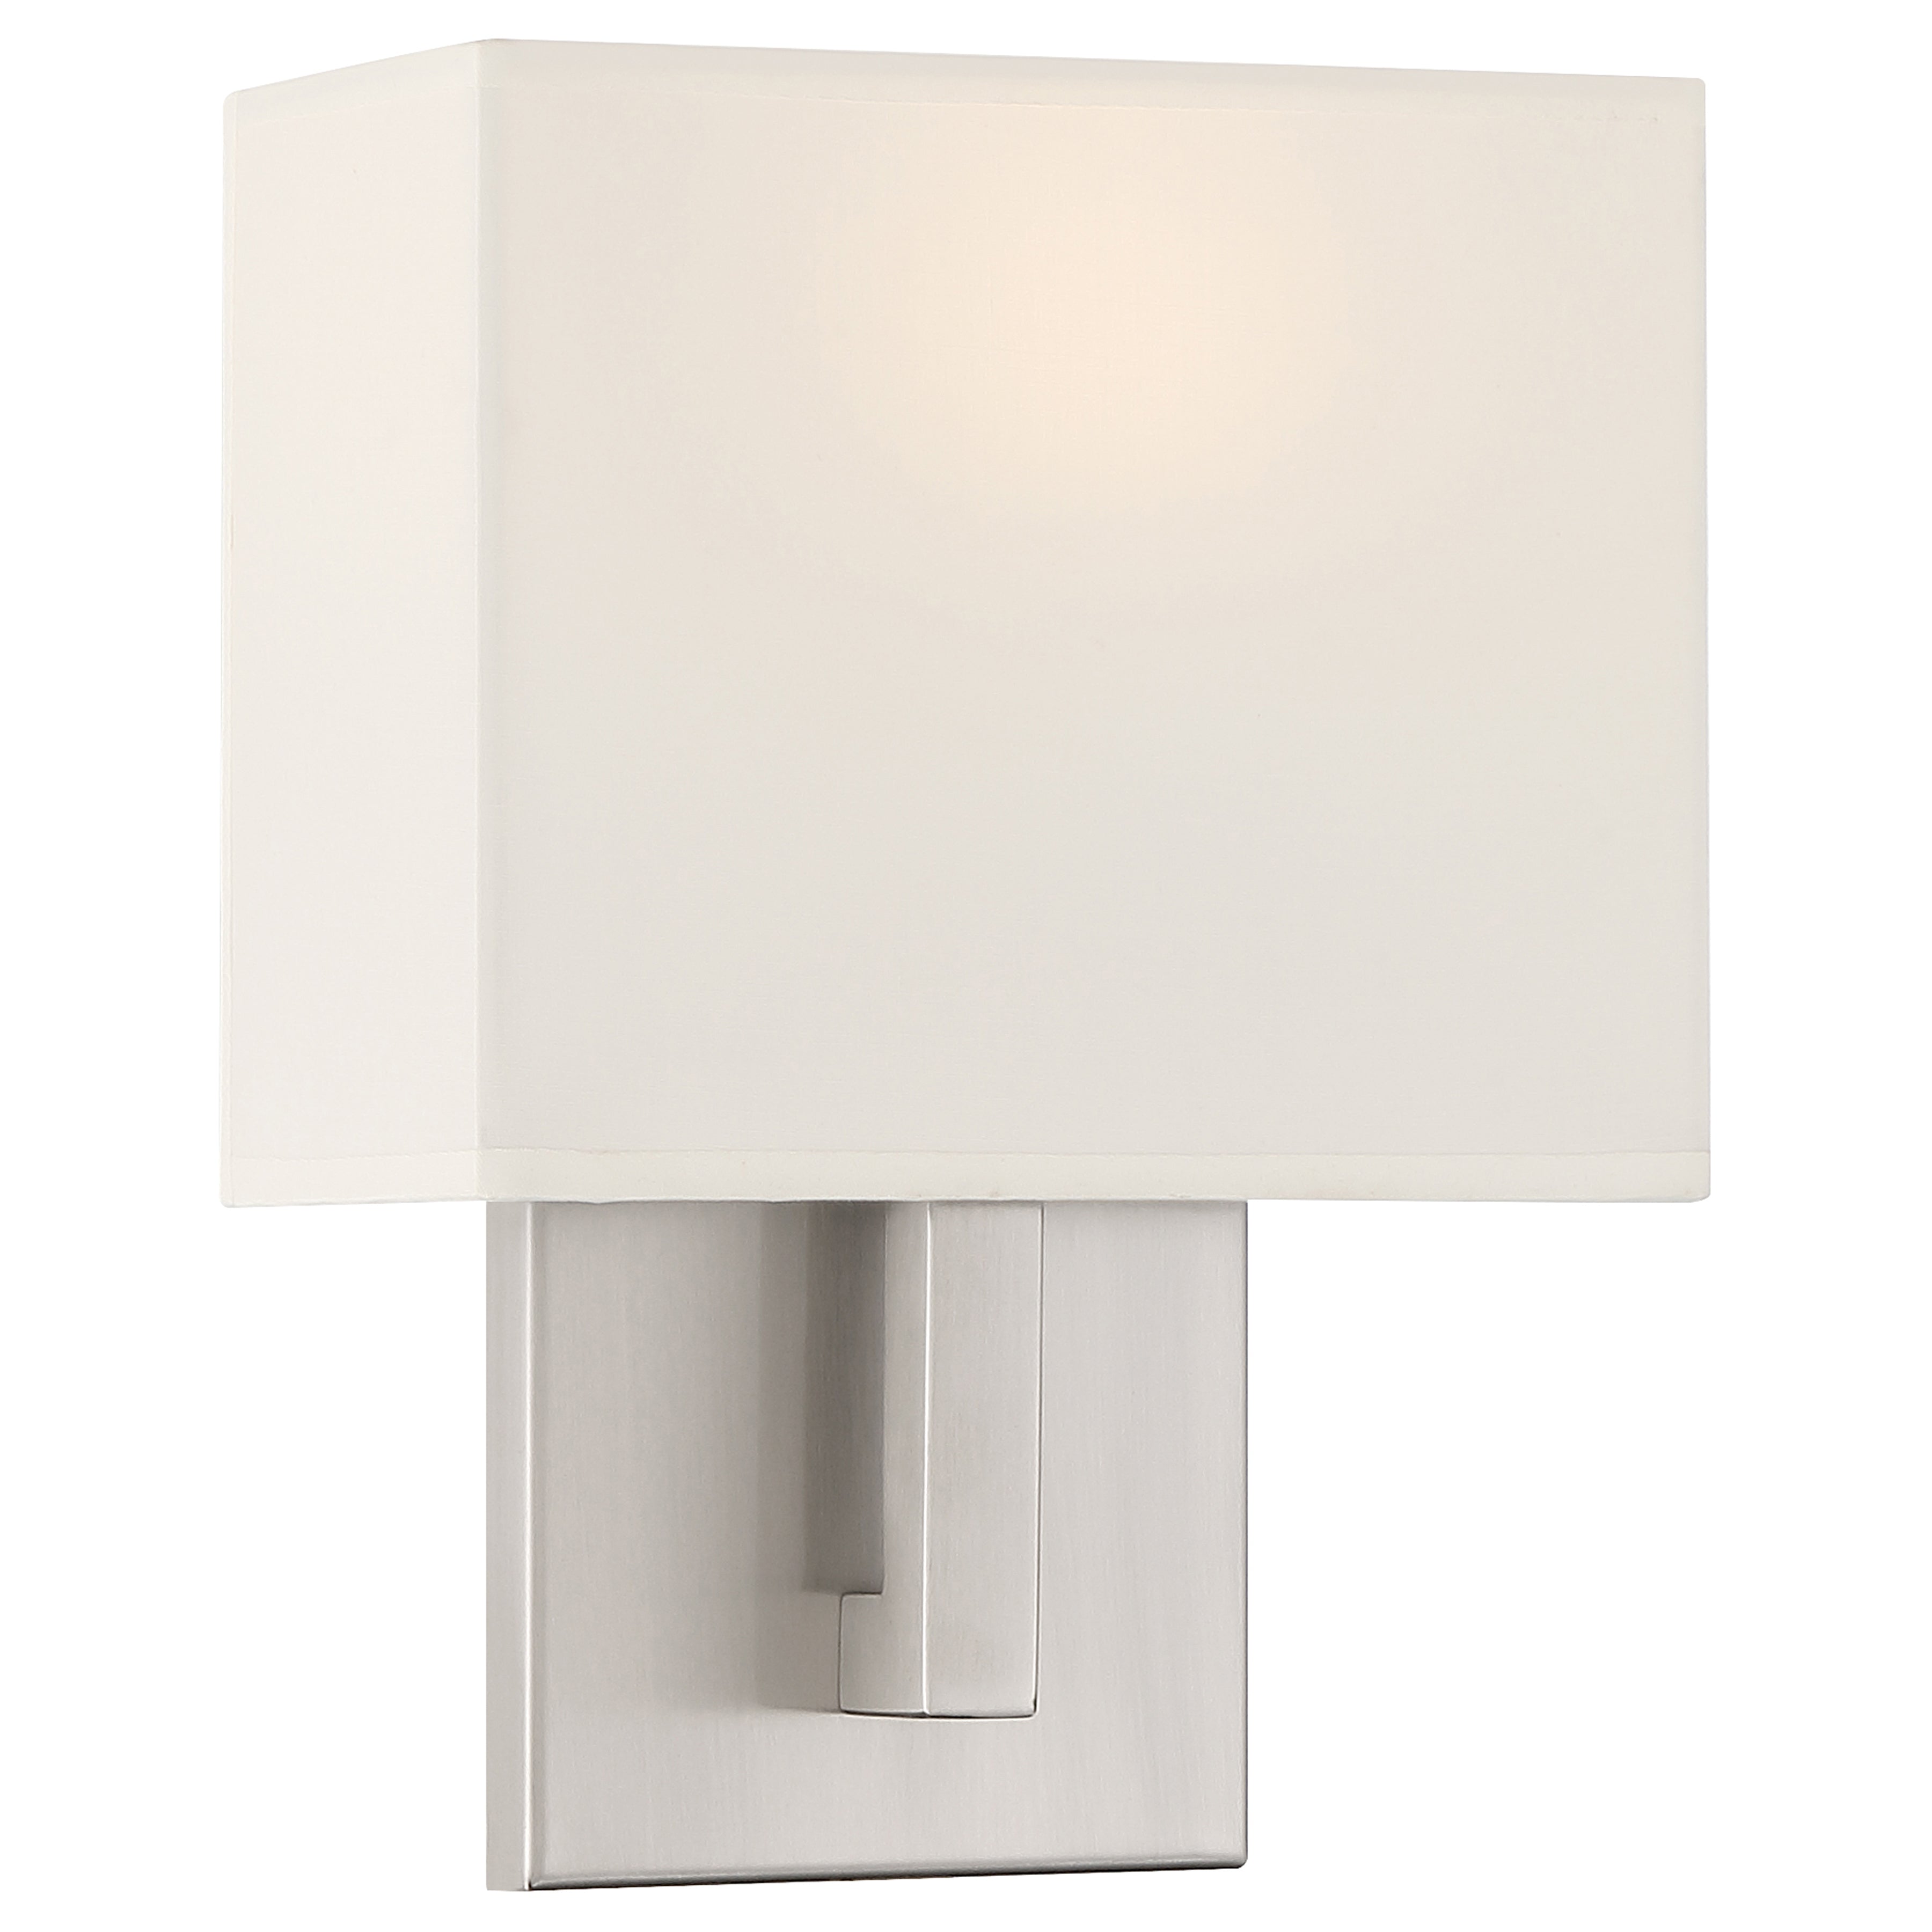 Access Lighting Mid Town 1 Light LED Wall Sconce